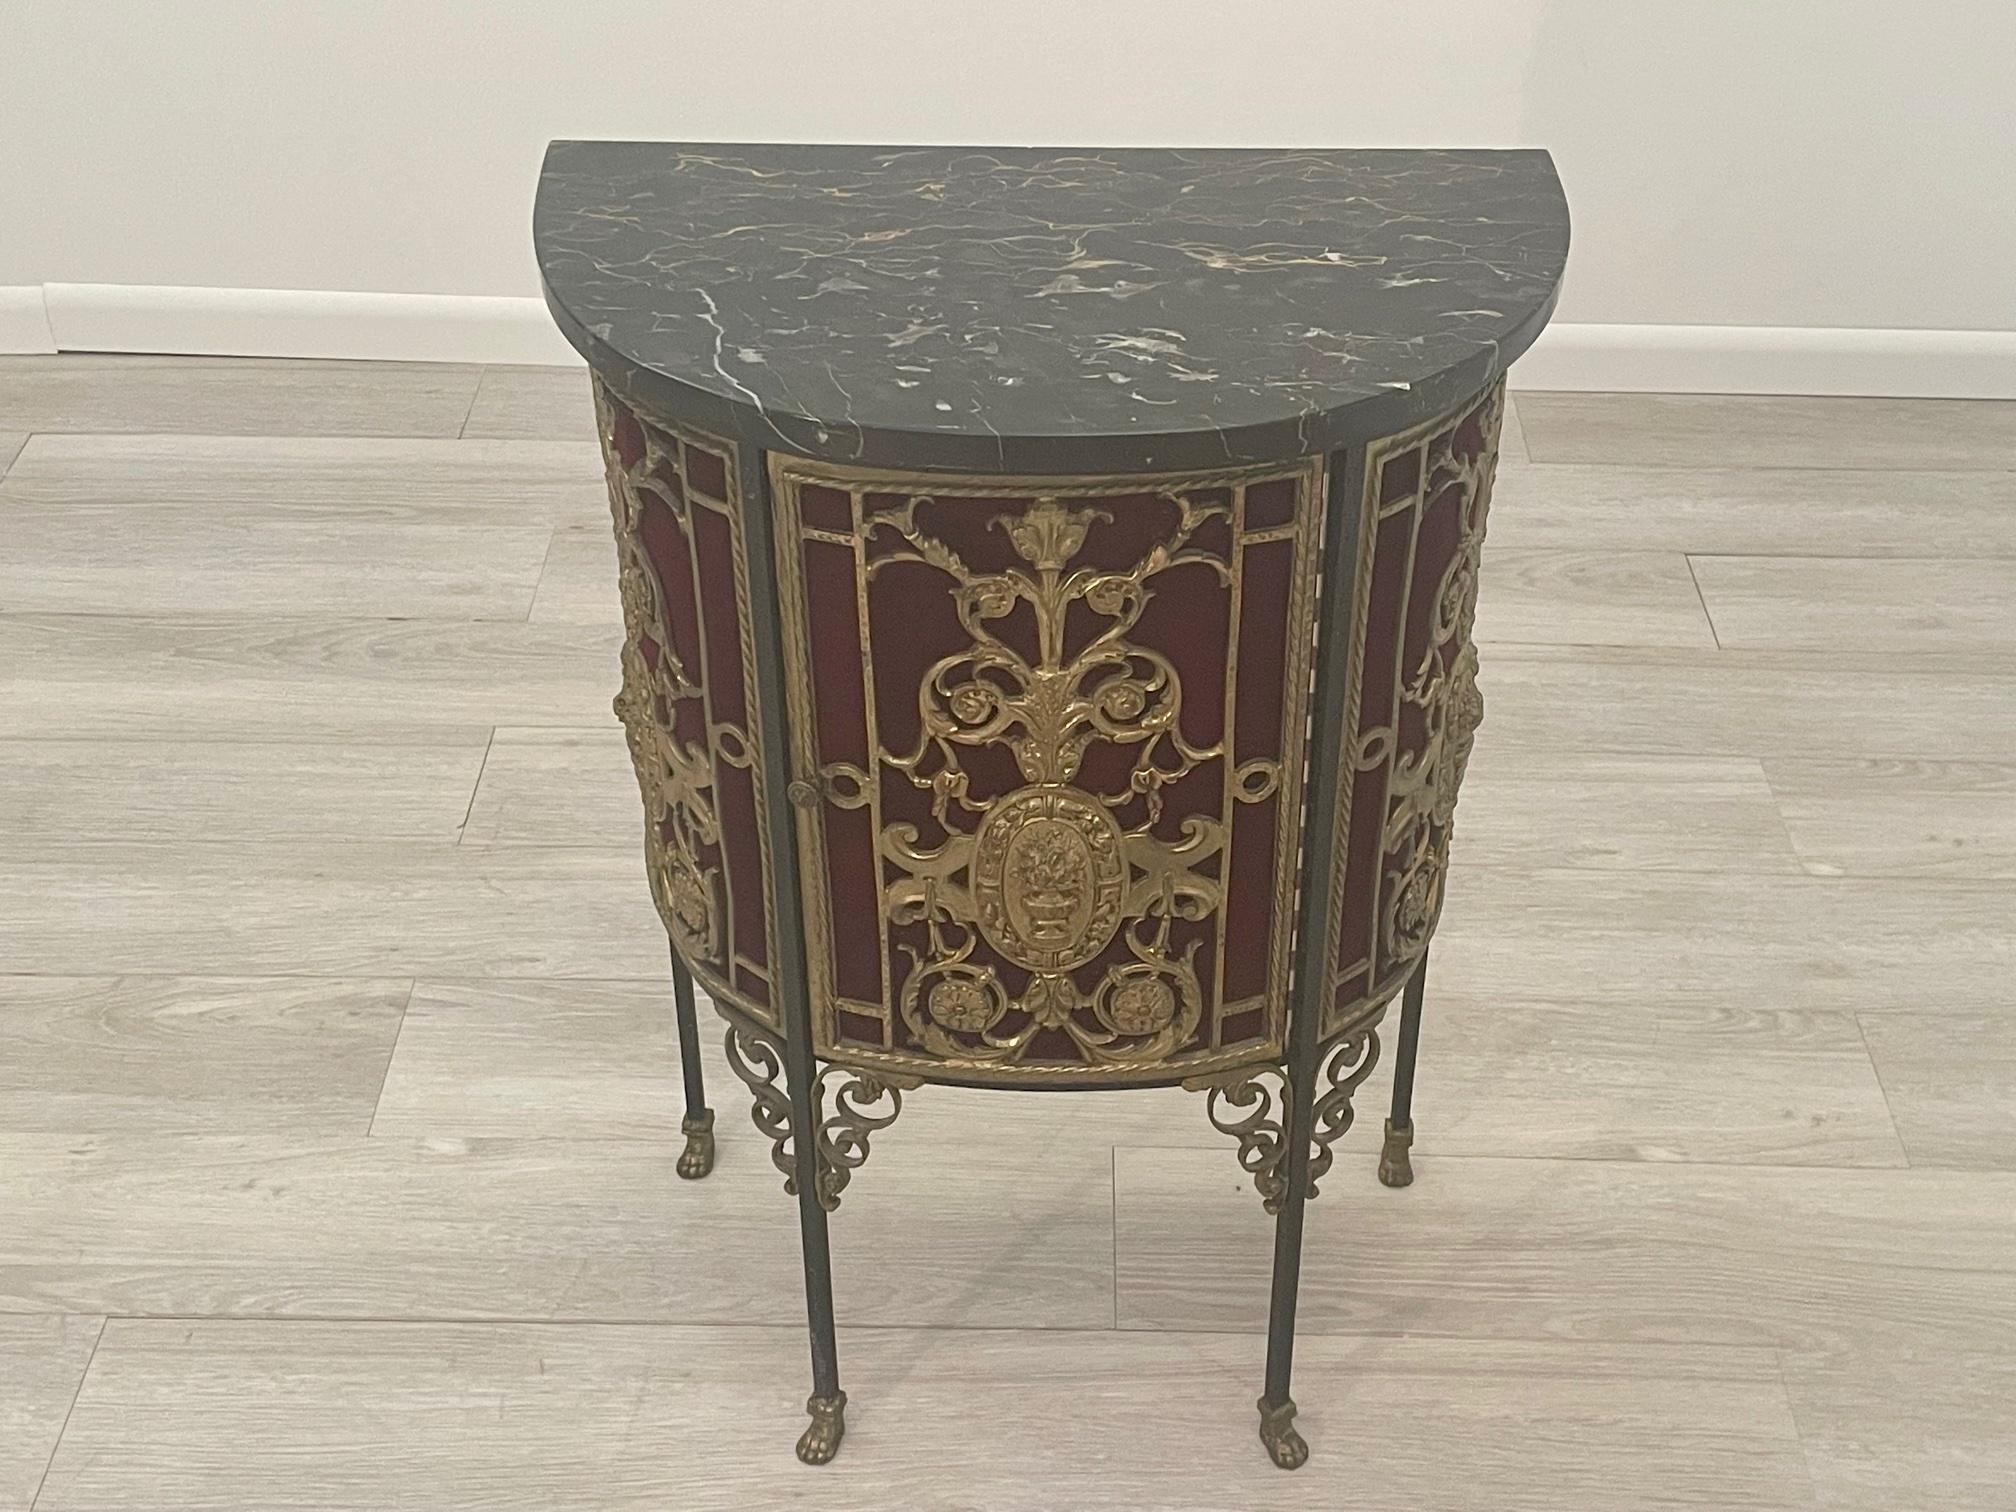 Gorgeous demilune shaped console and cabinet by Oscar Bach having ornate bronze filligree encrusted body with plush red velvet behind the frieze decoration, black marble top and storage inside. Marvelous details including elegant legs that terminate